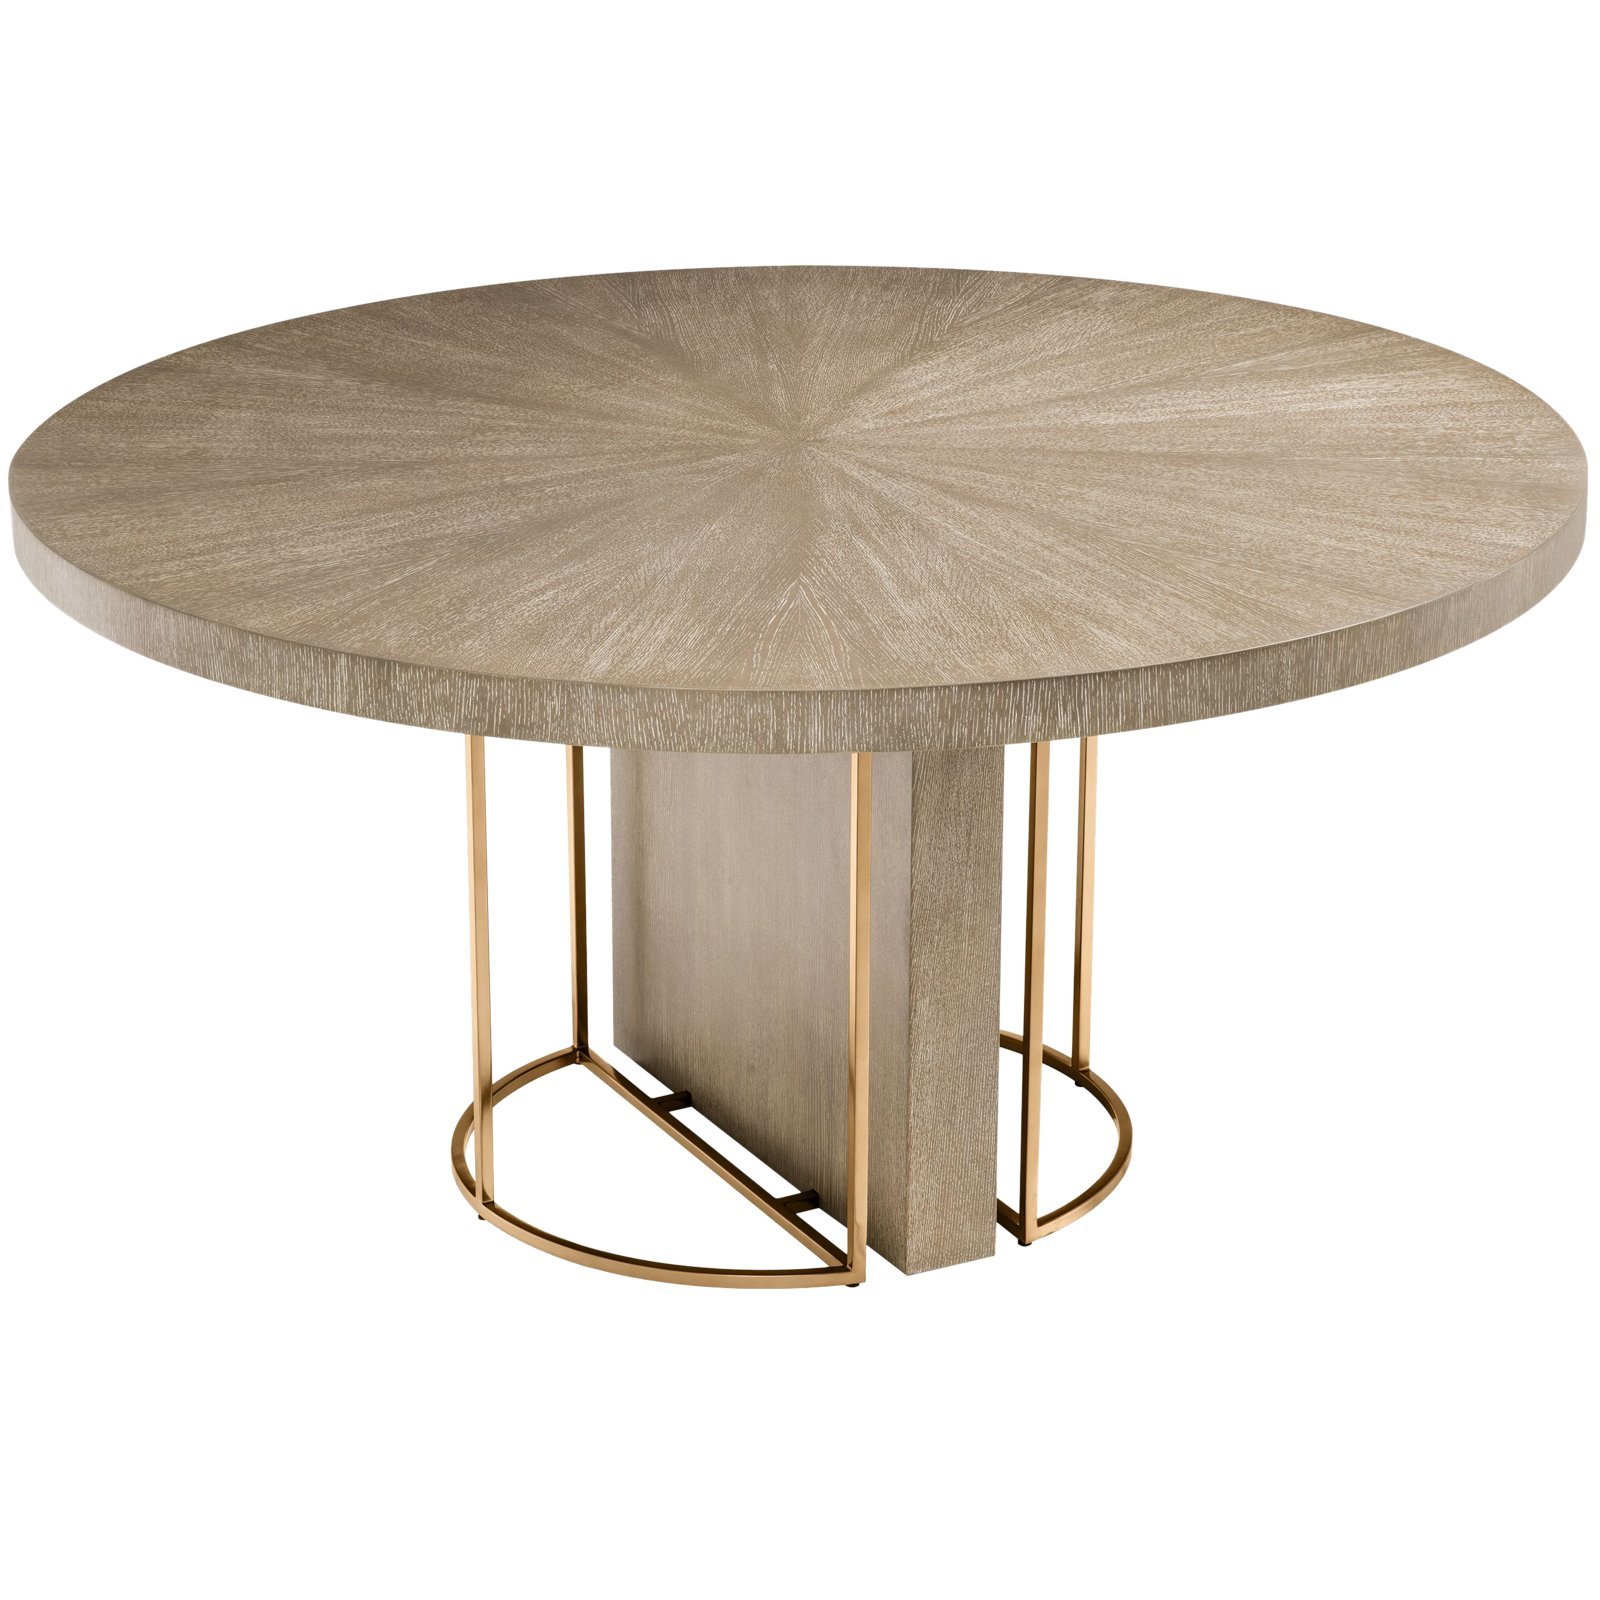 Design of Dining Table